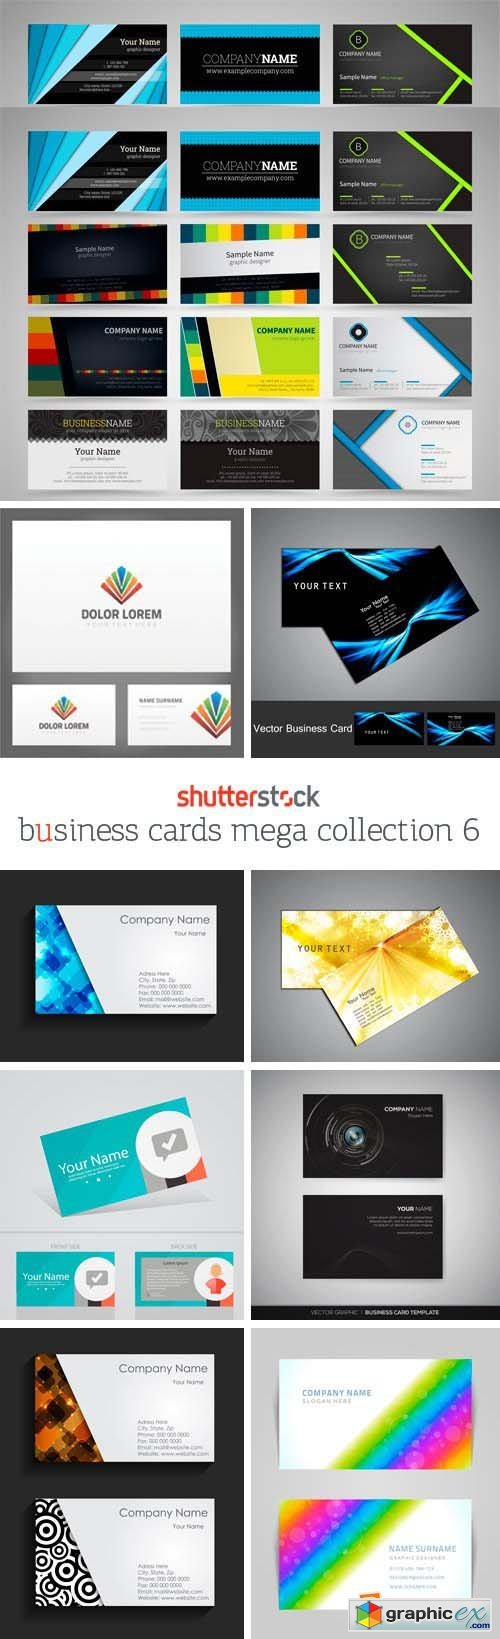 Amazing SS - Business Cards Mega Collection 6, 25xEPS